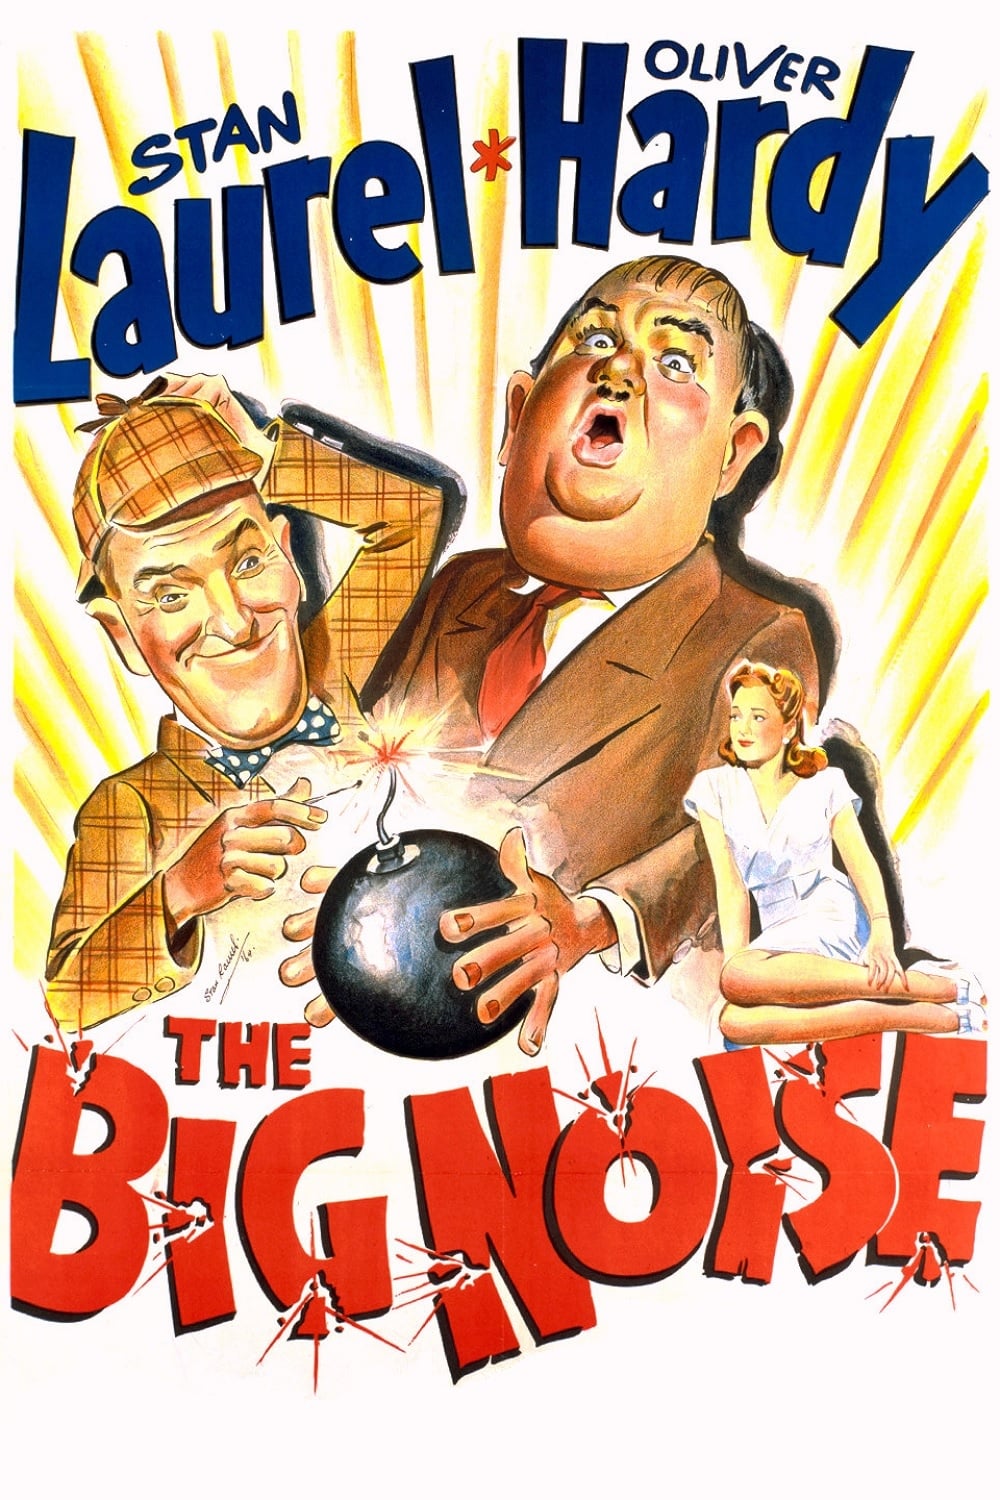 Poster for the movie "The Big Noise"